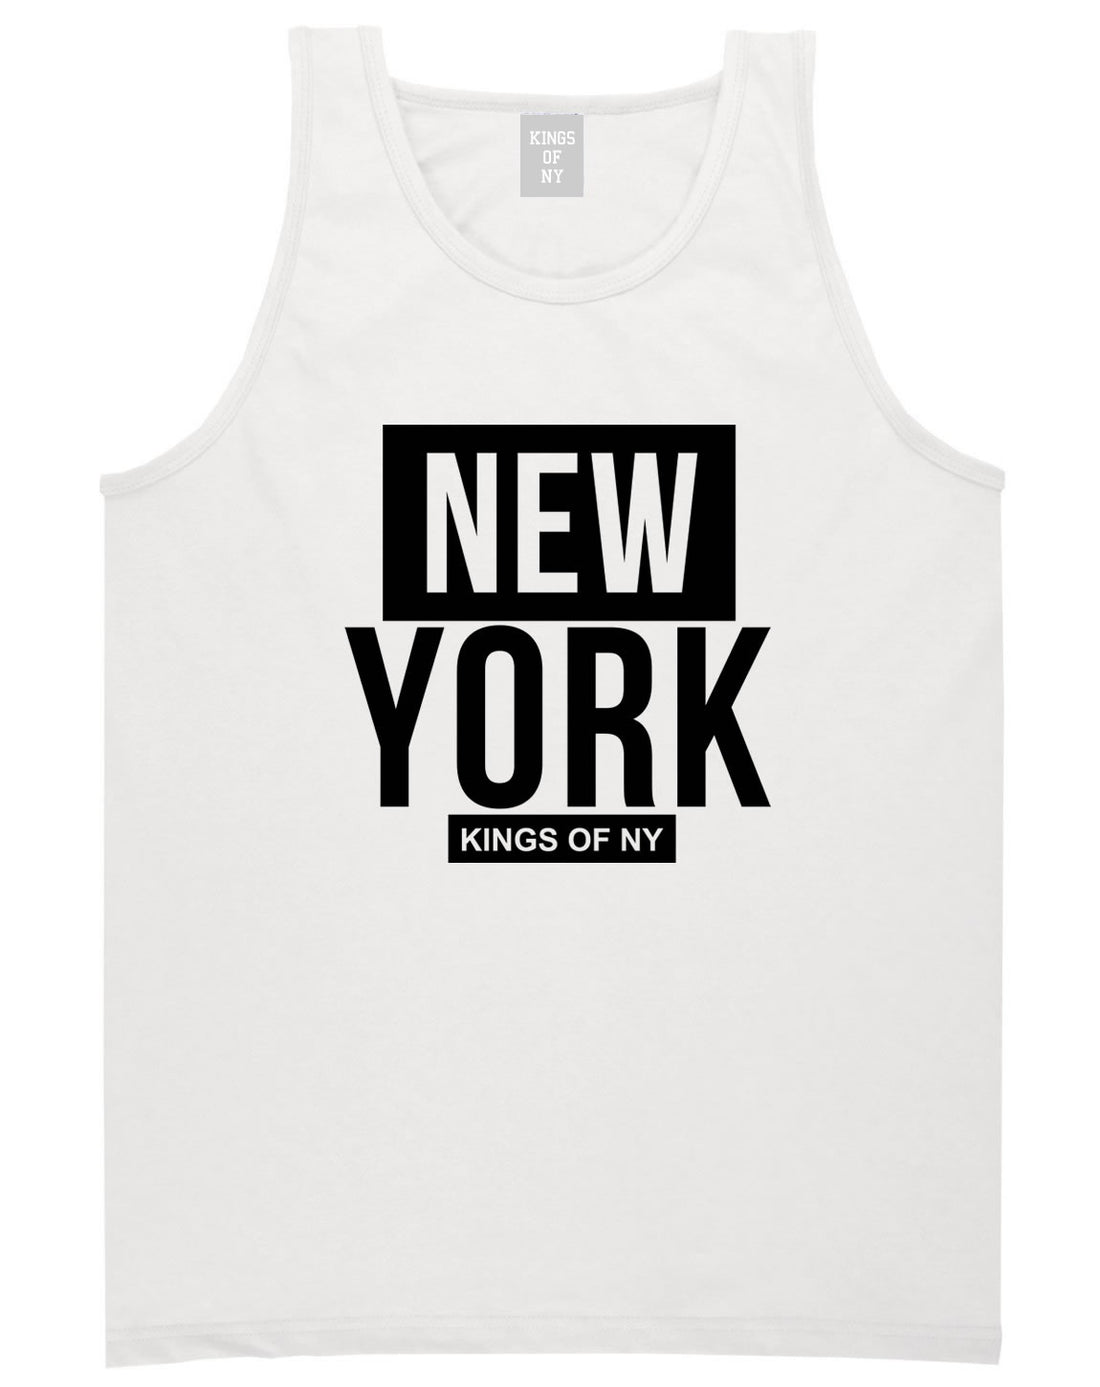 New York Block Box Tank Top in White by Kings Of NY